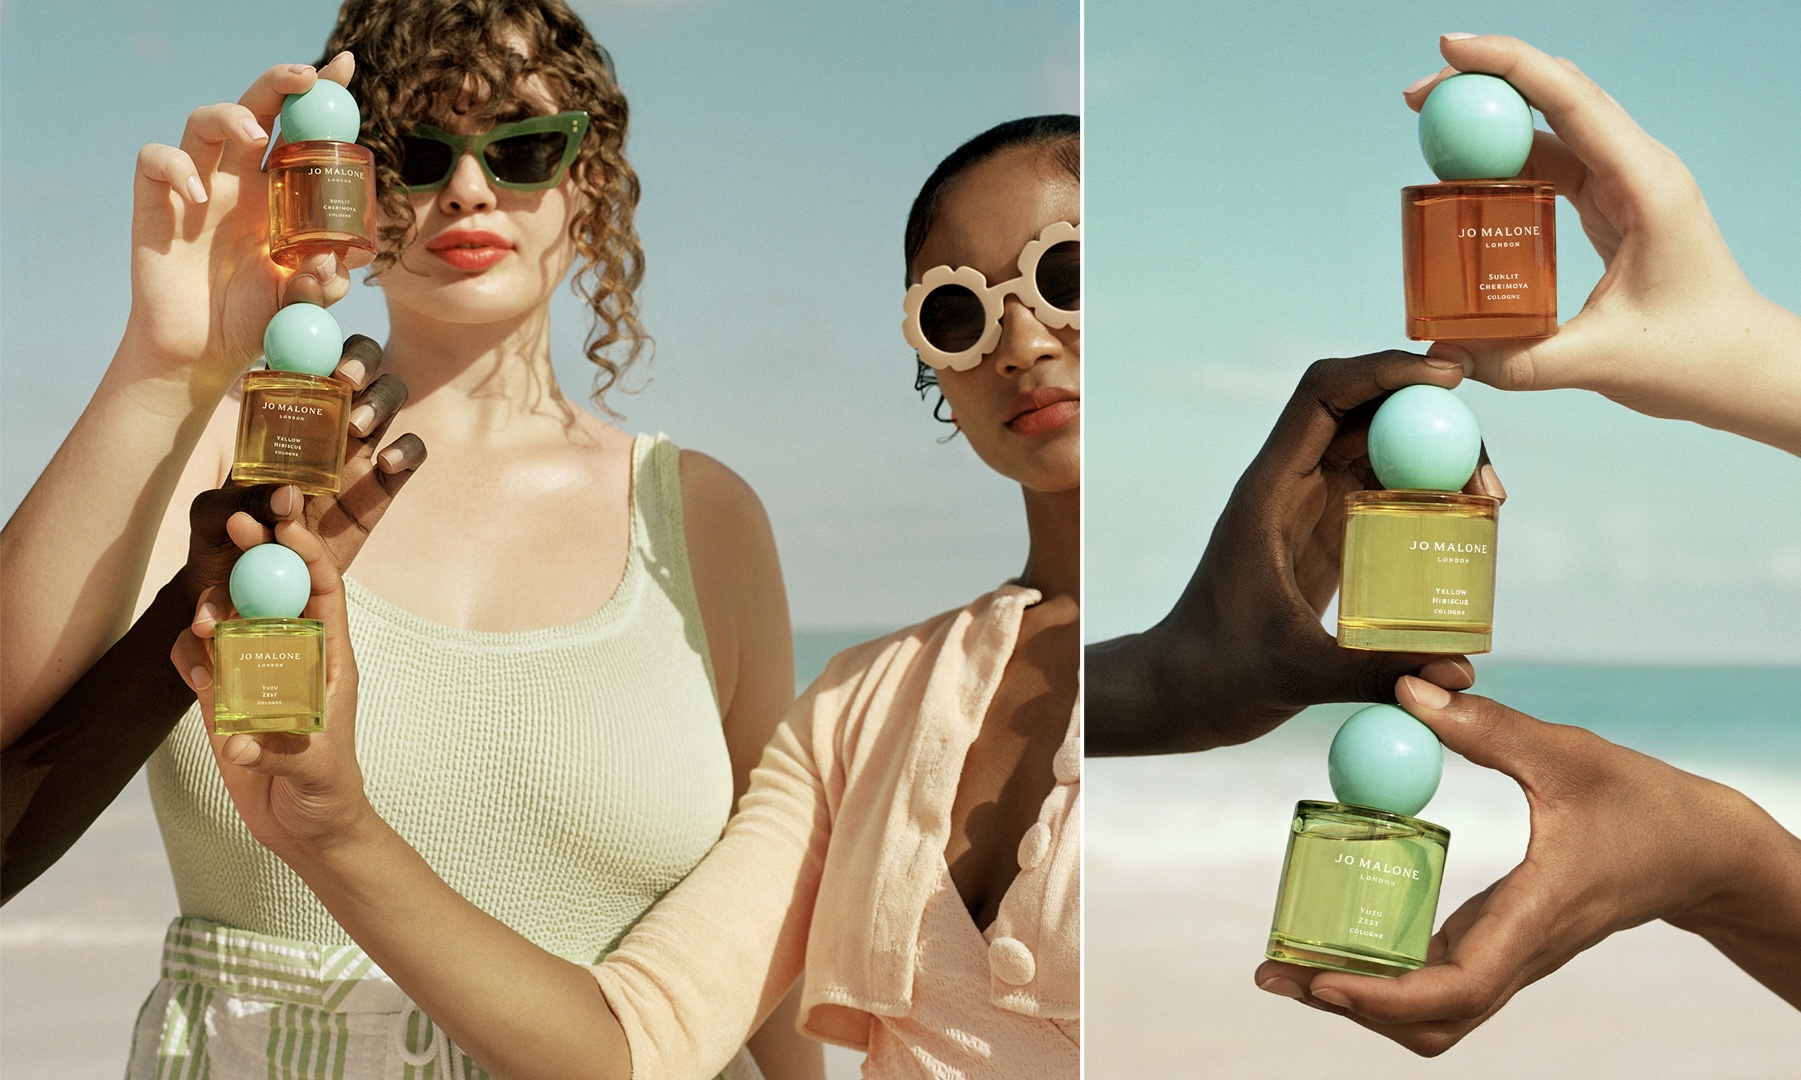 Jo Malone London has introduced its limited edition fragrance collection for this summer